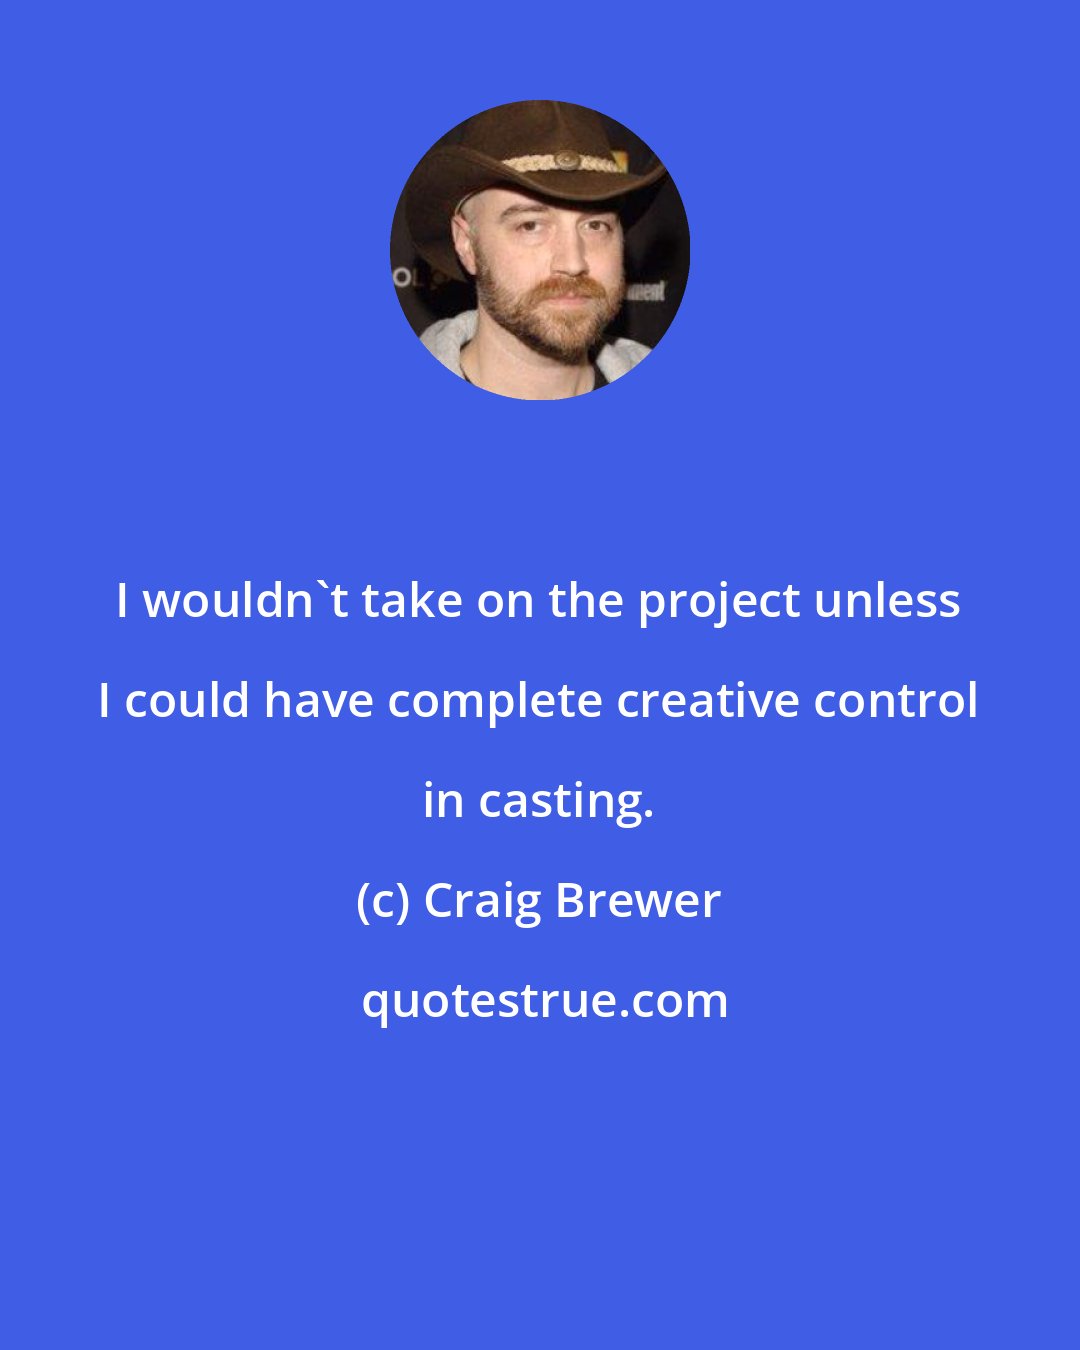 Craig Brewer: I wouldn't take on the project unless I could have complete creative control in casting.